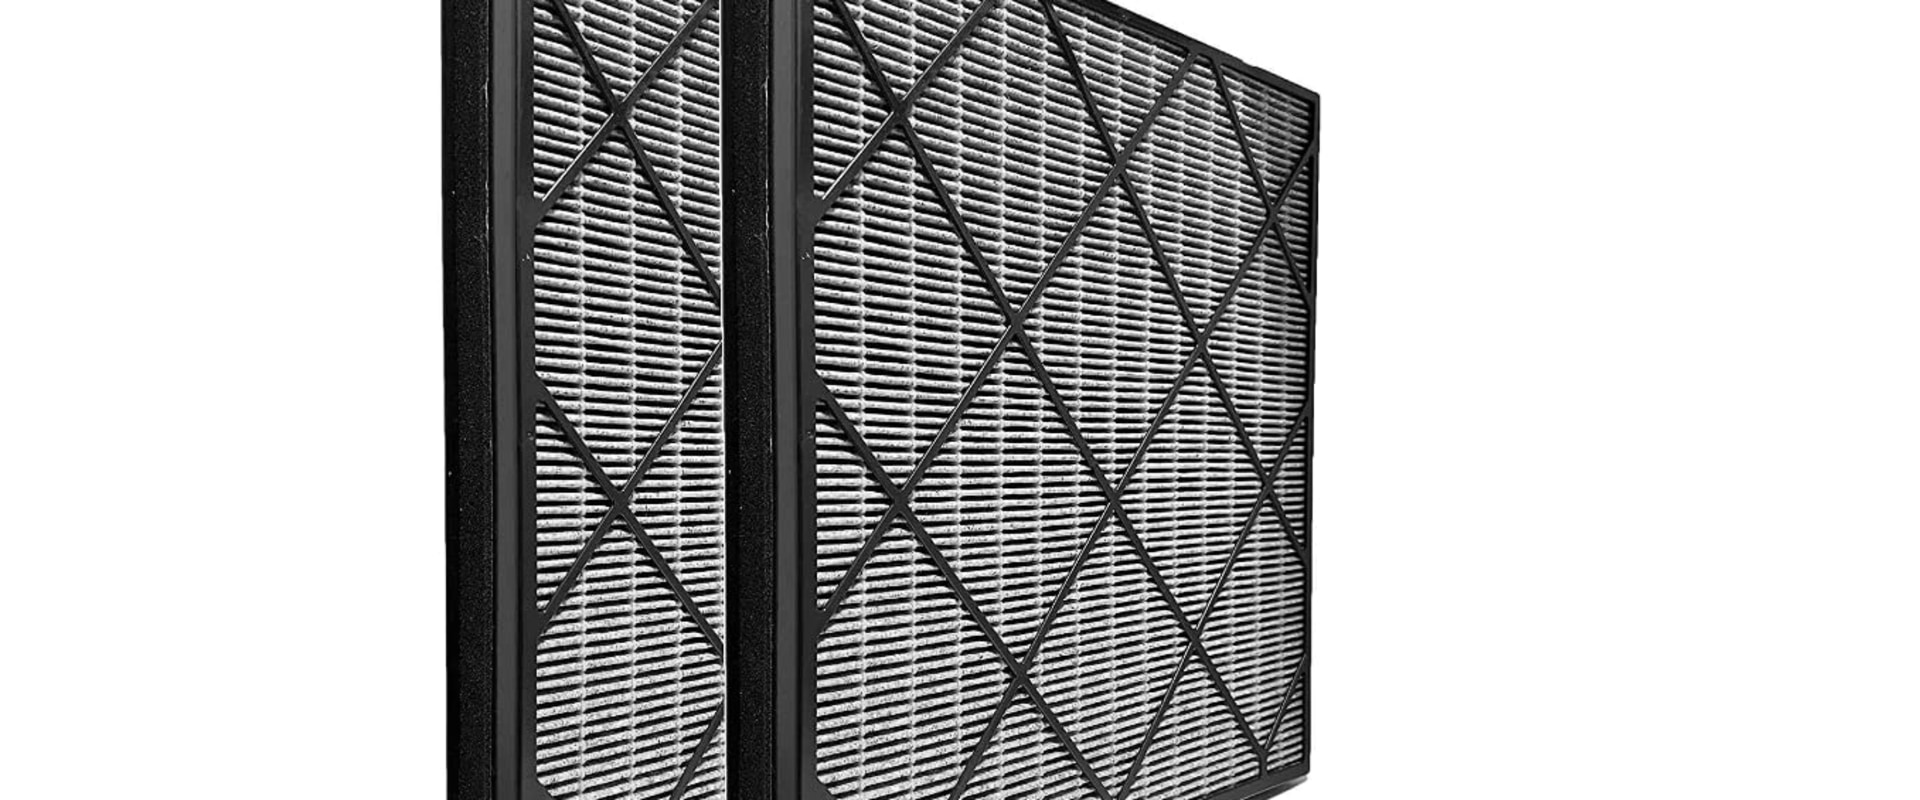 What is the Difference Between Stage 3 and Stage 4 Air Purifiers?